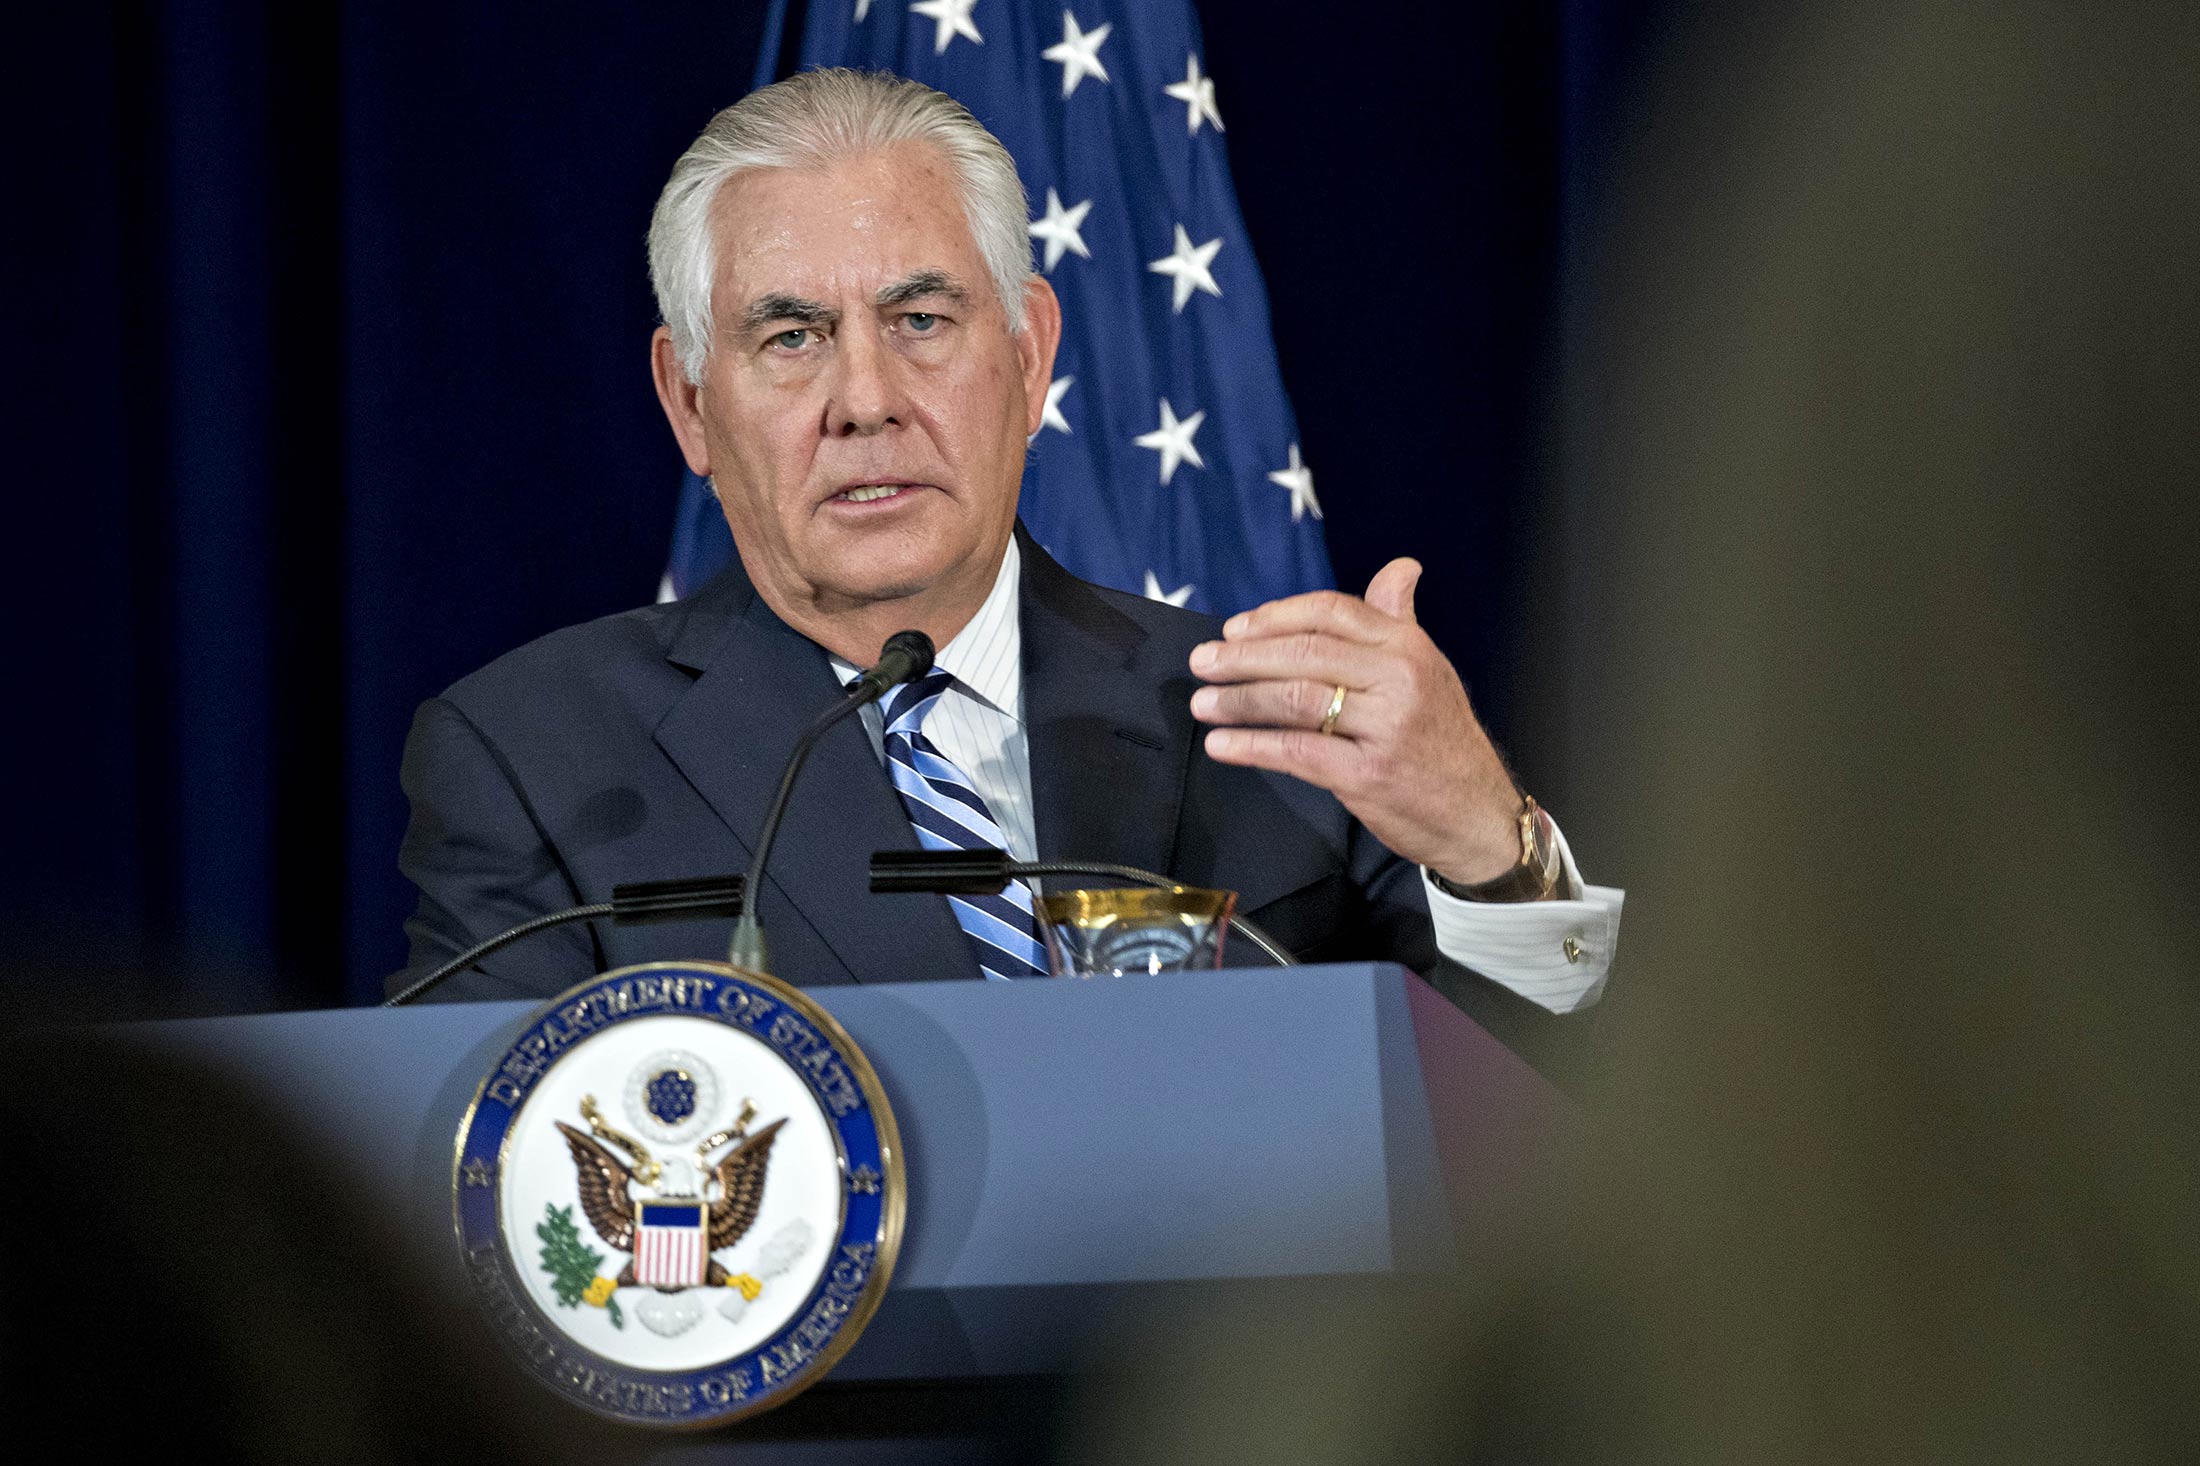 Rex Tillerson, U.S. secretary of State, speaks at a news conference at the State Department in Washington, D.C., on Thursday.
